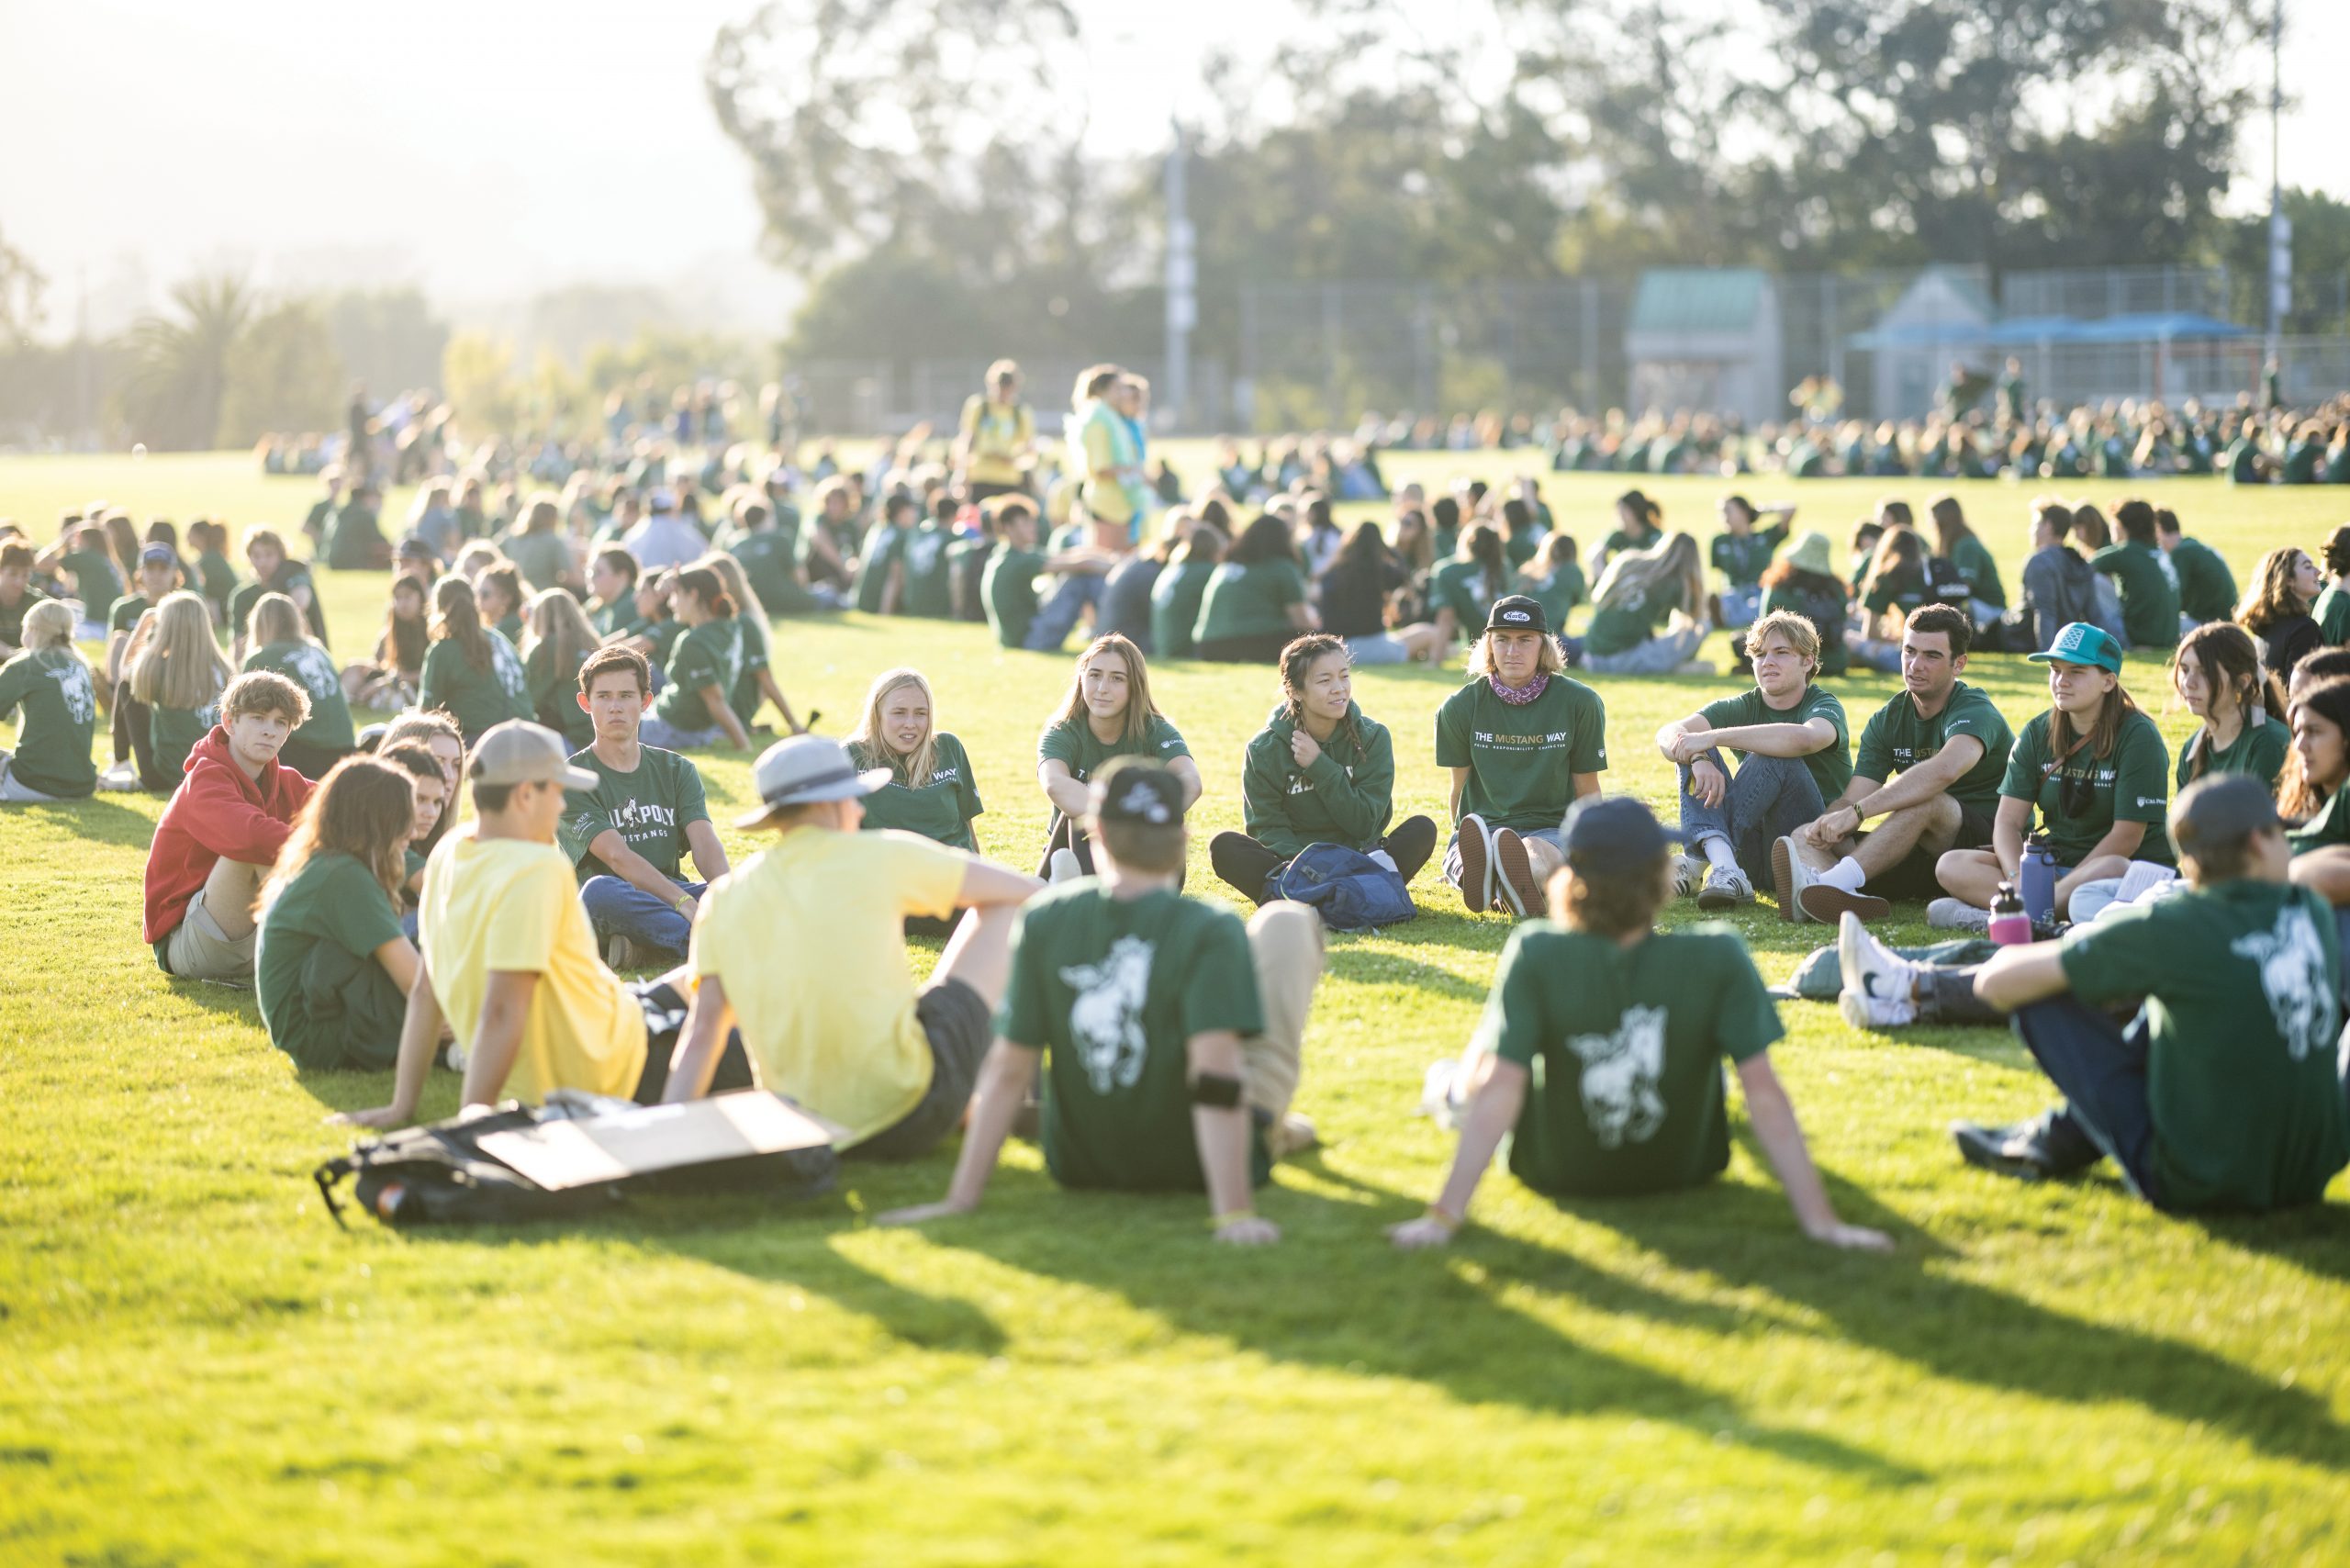 Groups of students in green WOW t-shirts gather in large circles on the grass as the sun sets behind them.